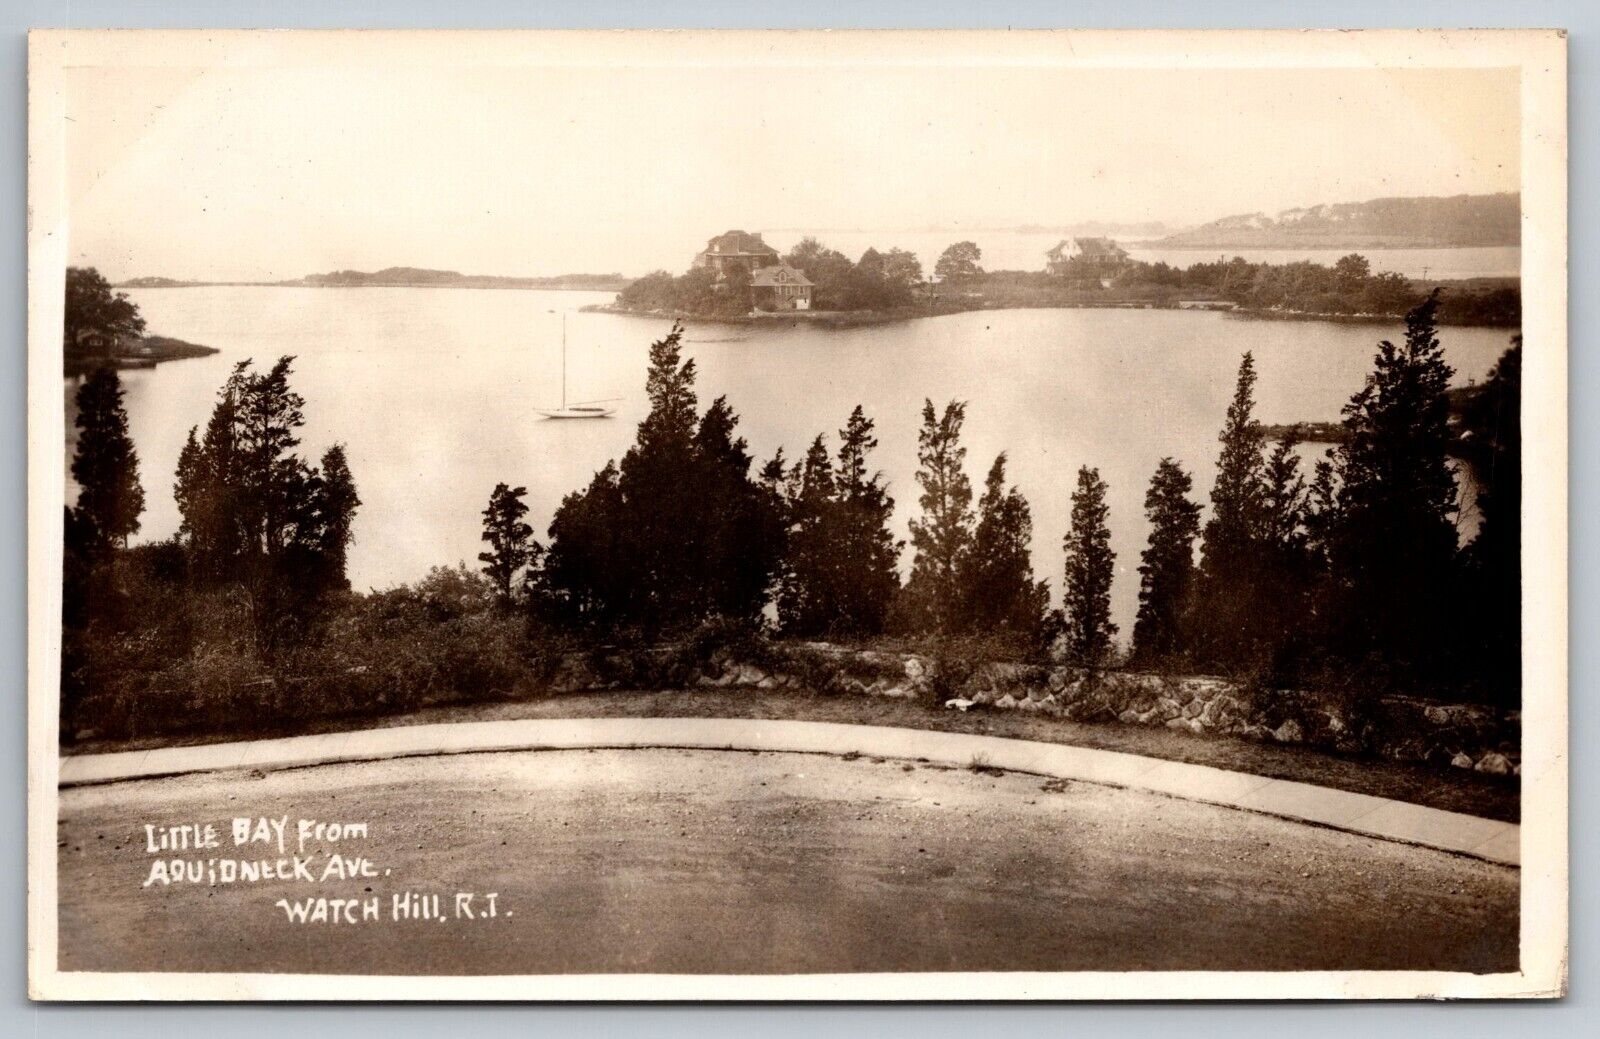 Little Bay from Aquidneck Ave. Watch Hill Rhode Island Real Photo Postcard RPPC.